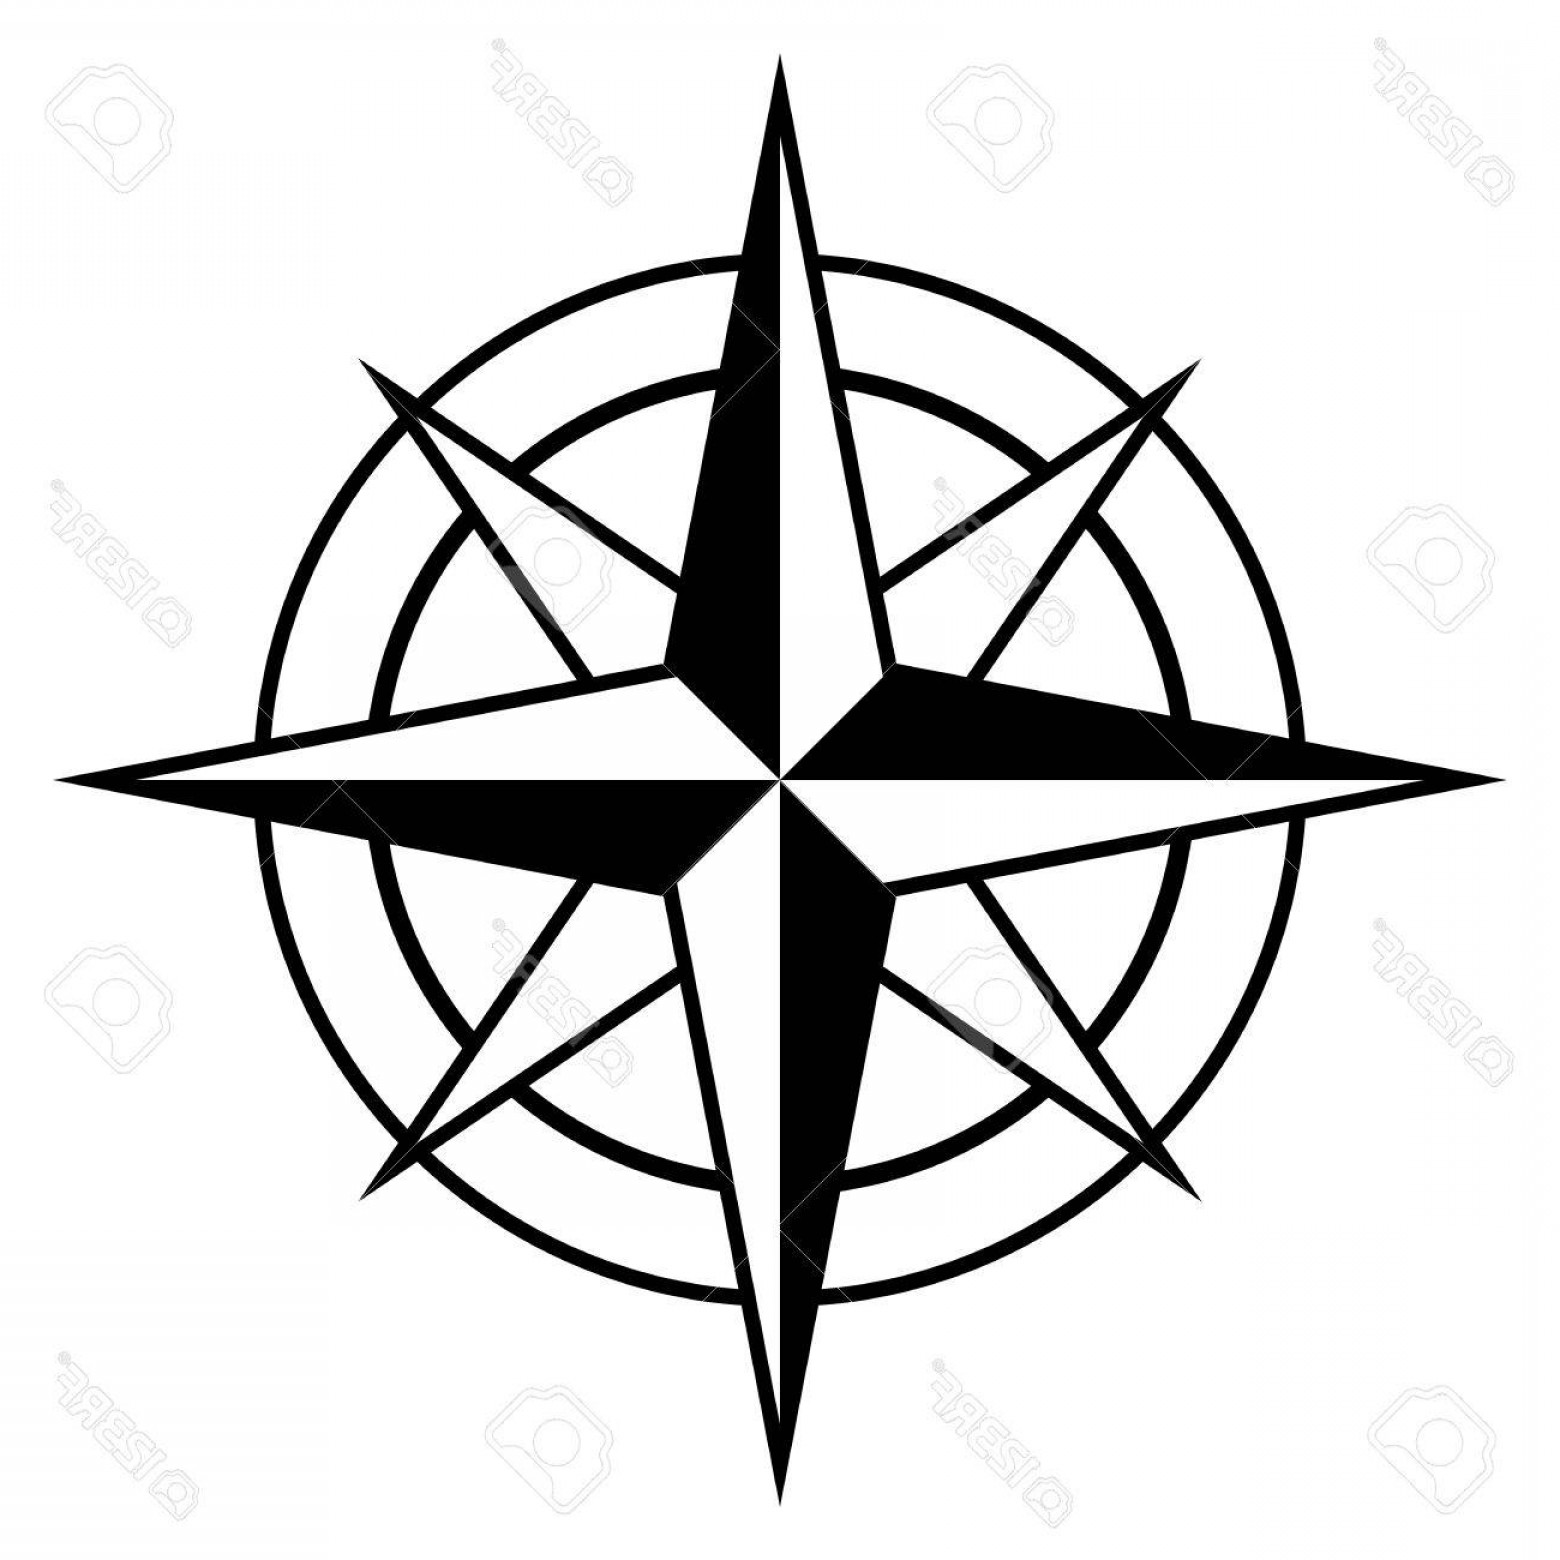 Compass Rose Vector Art At Collection Of Compass Rose Vector Art Free For 7035